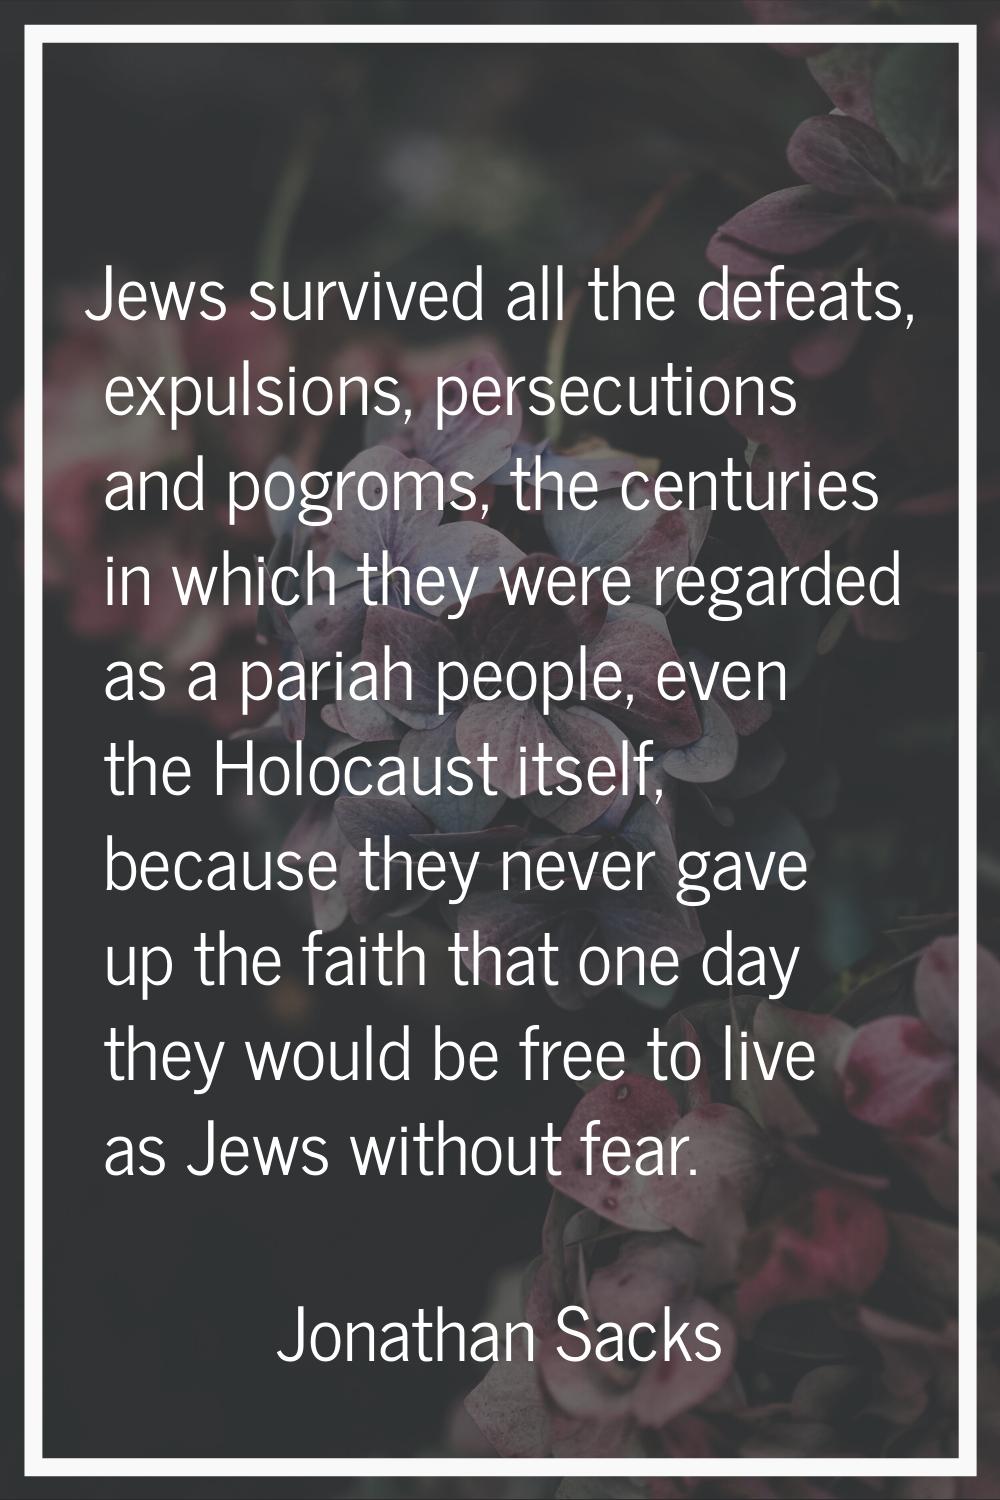 Jews survived all the defeats, expulsions, persecutions and pogroms, the centuries in which they we